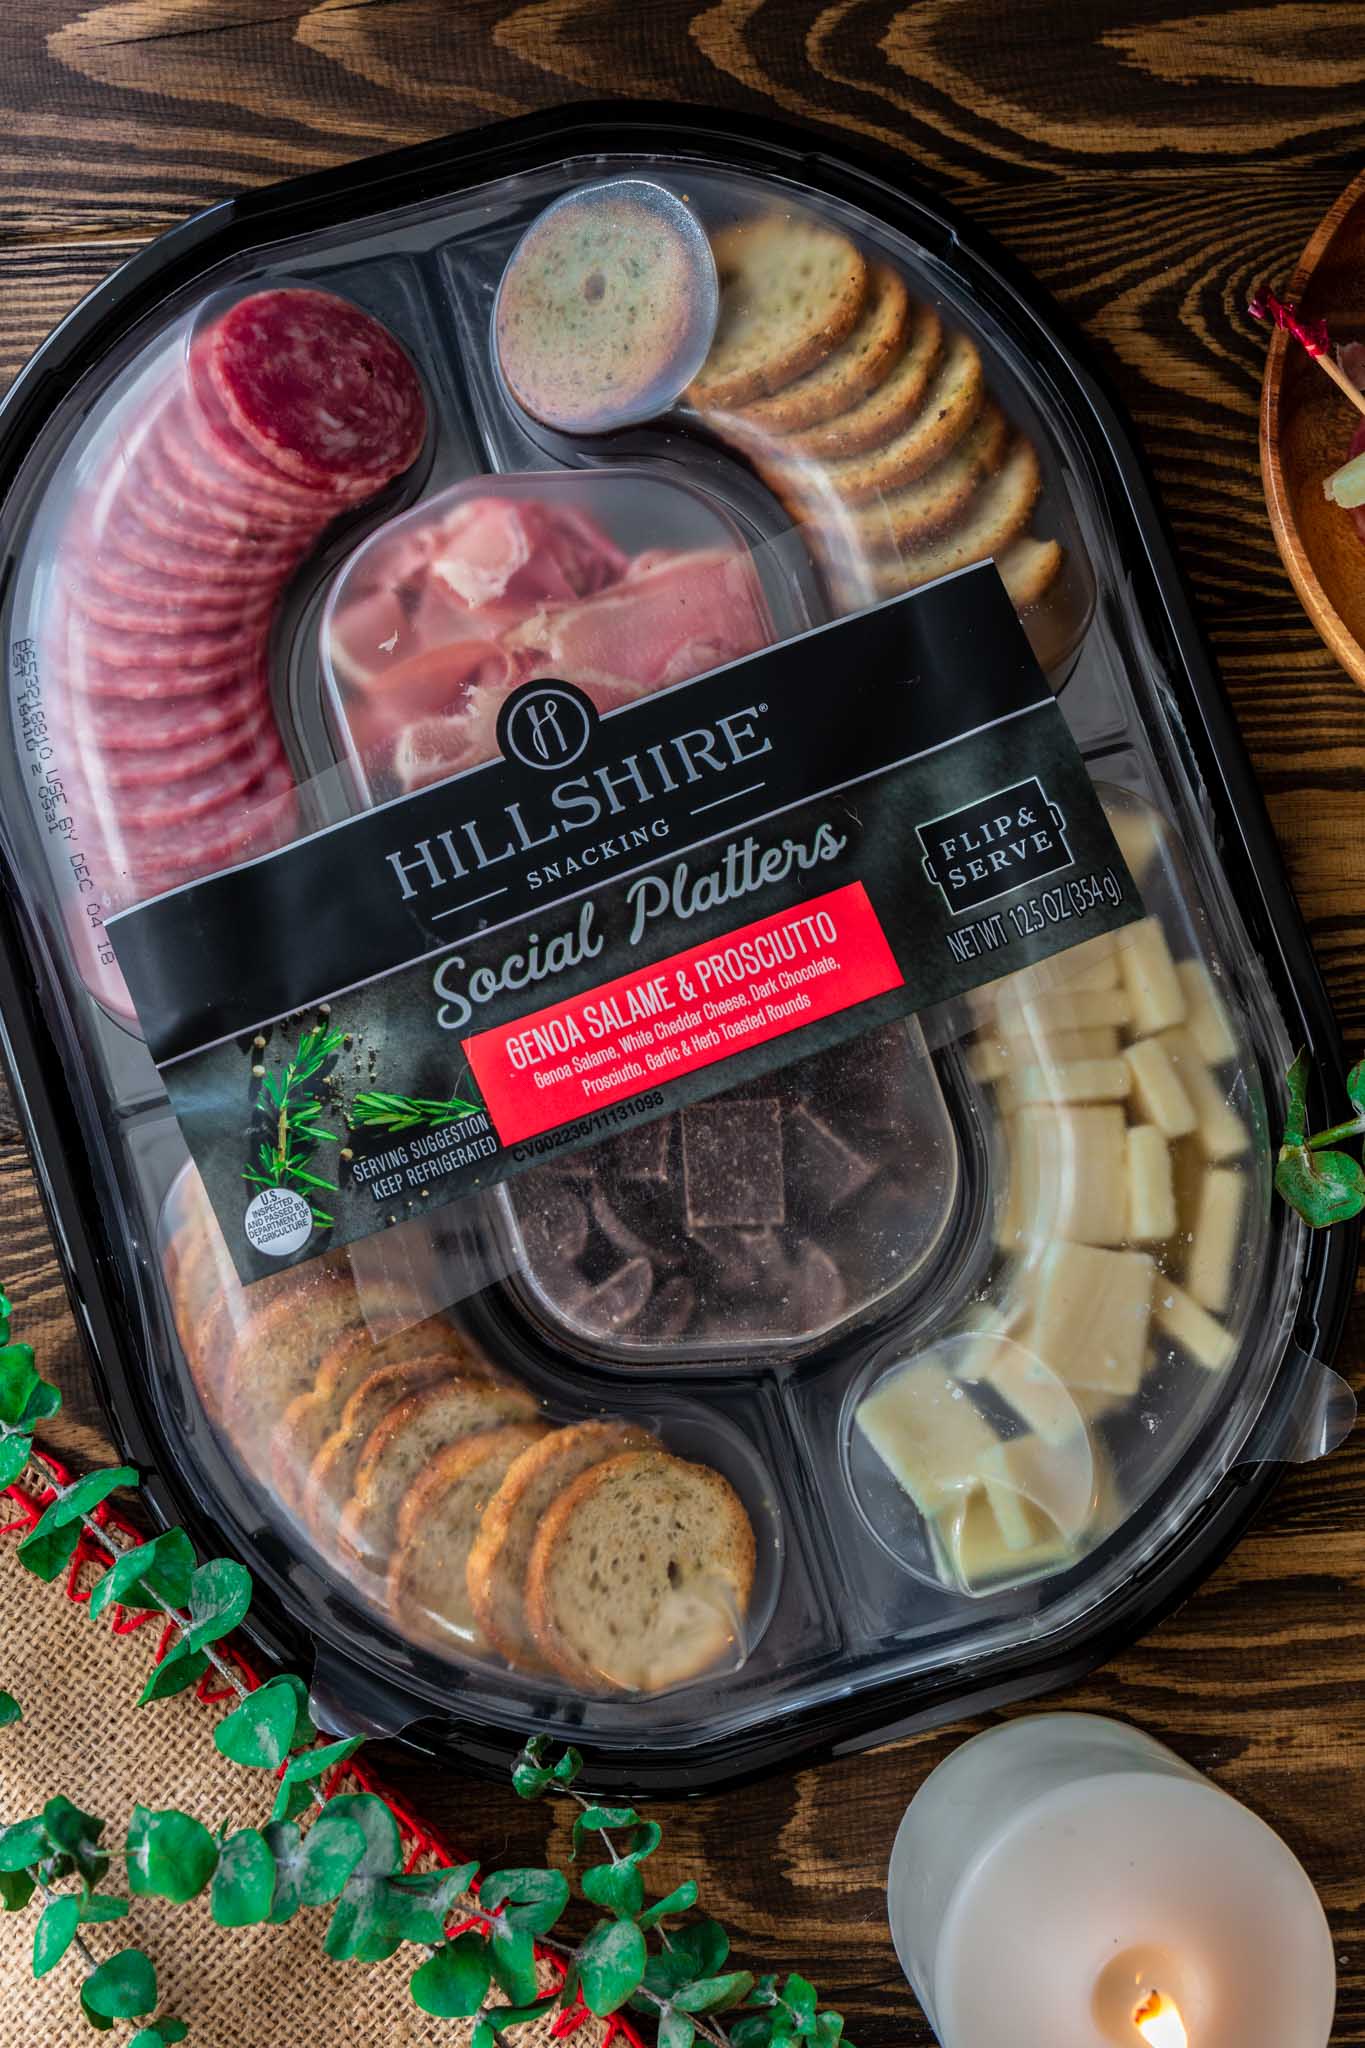 How to Host a Low Key Yet Classy Holiday Party | www.oliviascuisine.com | Imagine you could host a party and enjoy yourself at the same time. Hard to believe it’s possible? With the help of Hillshire® Snacking Social Platters, it is! Just head over to the blog to read my tips and be prepared to let go of all that holiday season stress.